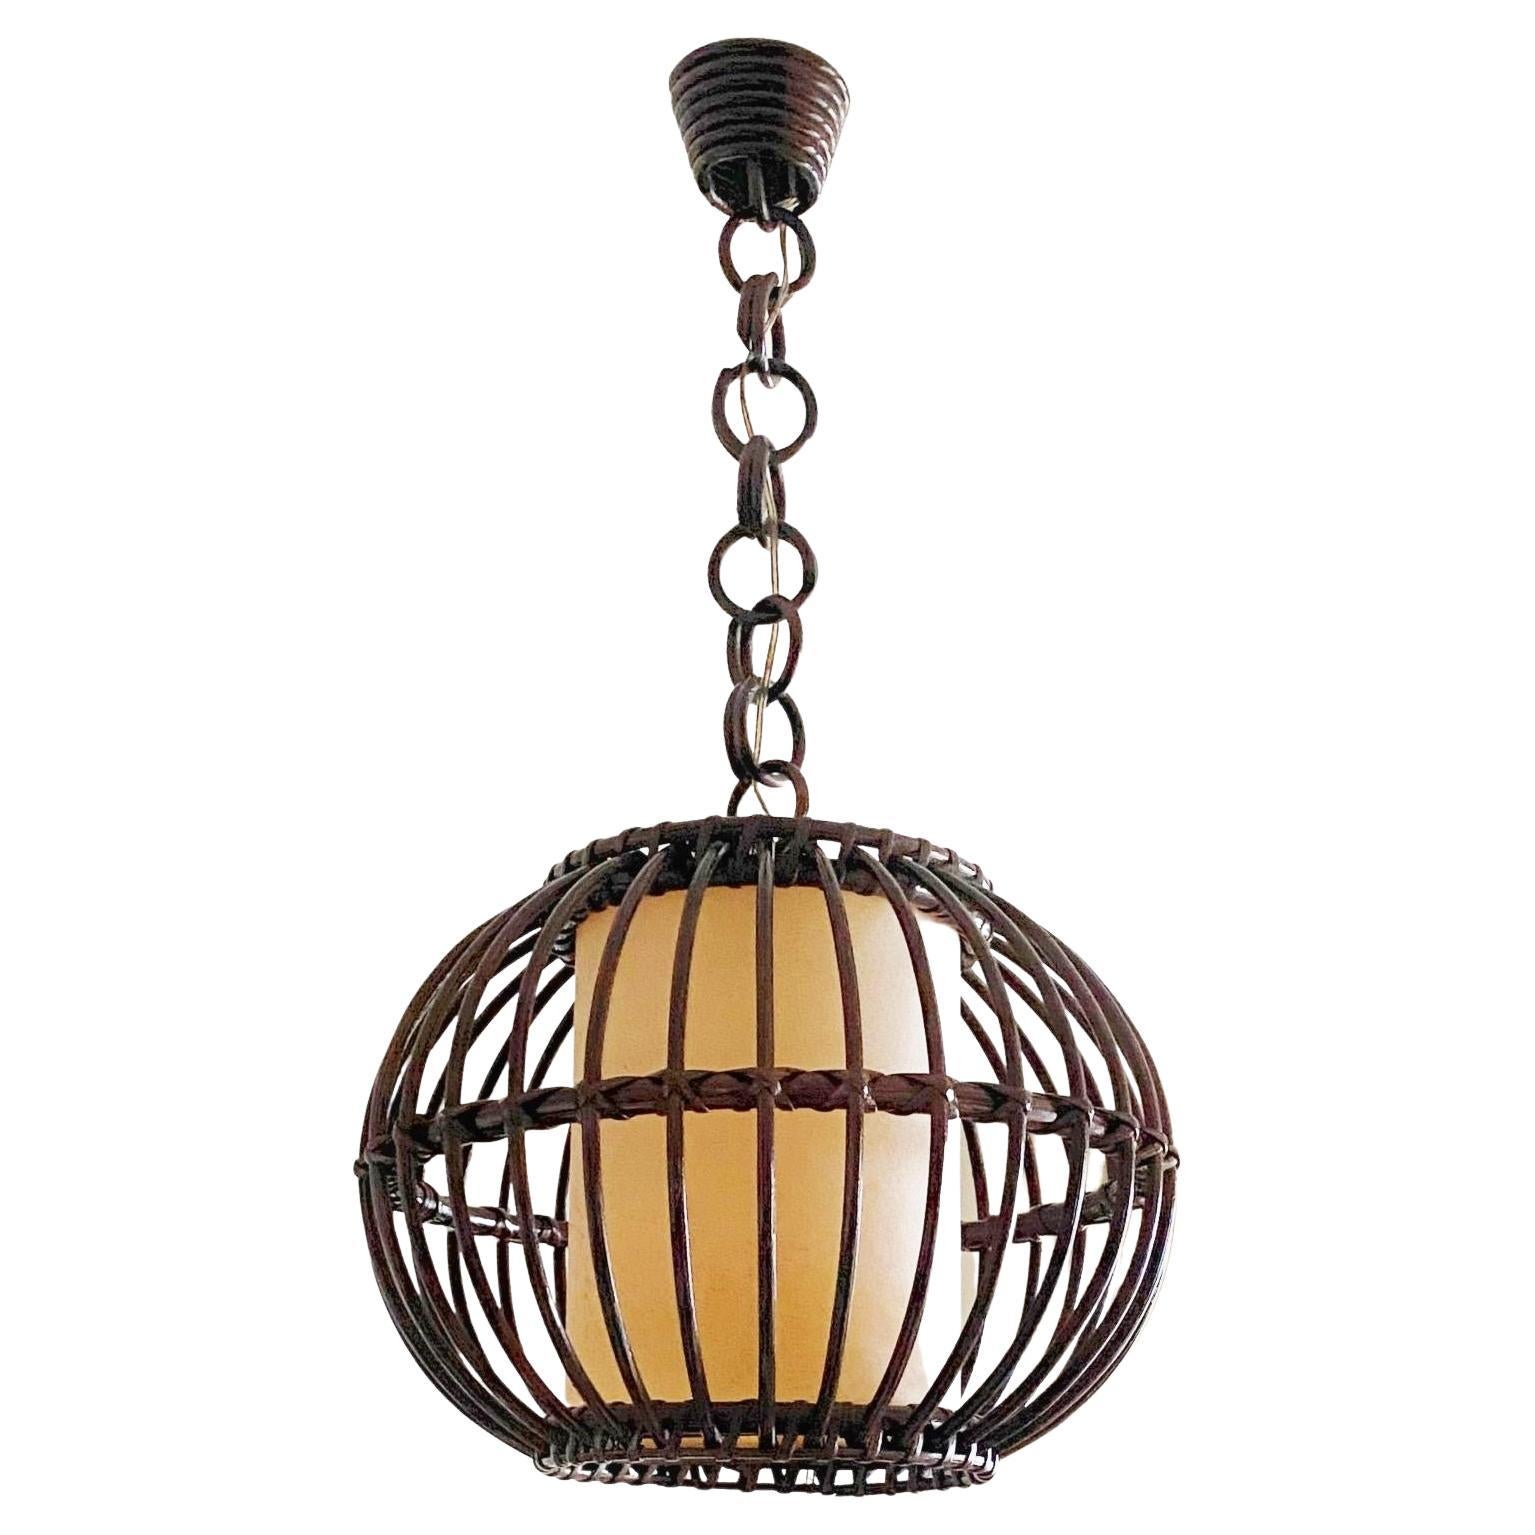 Louis Sognot Bamboo Rattan Pendant Lantern with Perchment Shade, France, 1950s For Sale